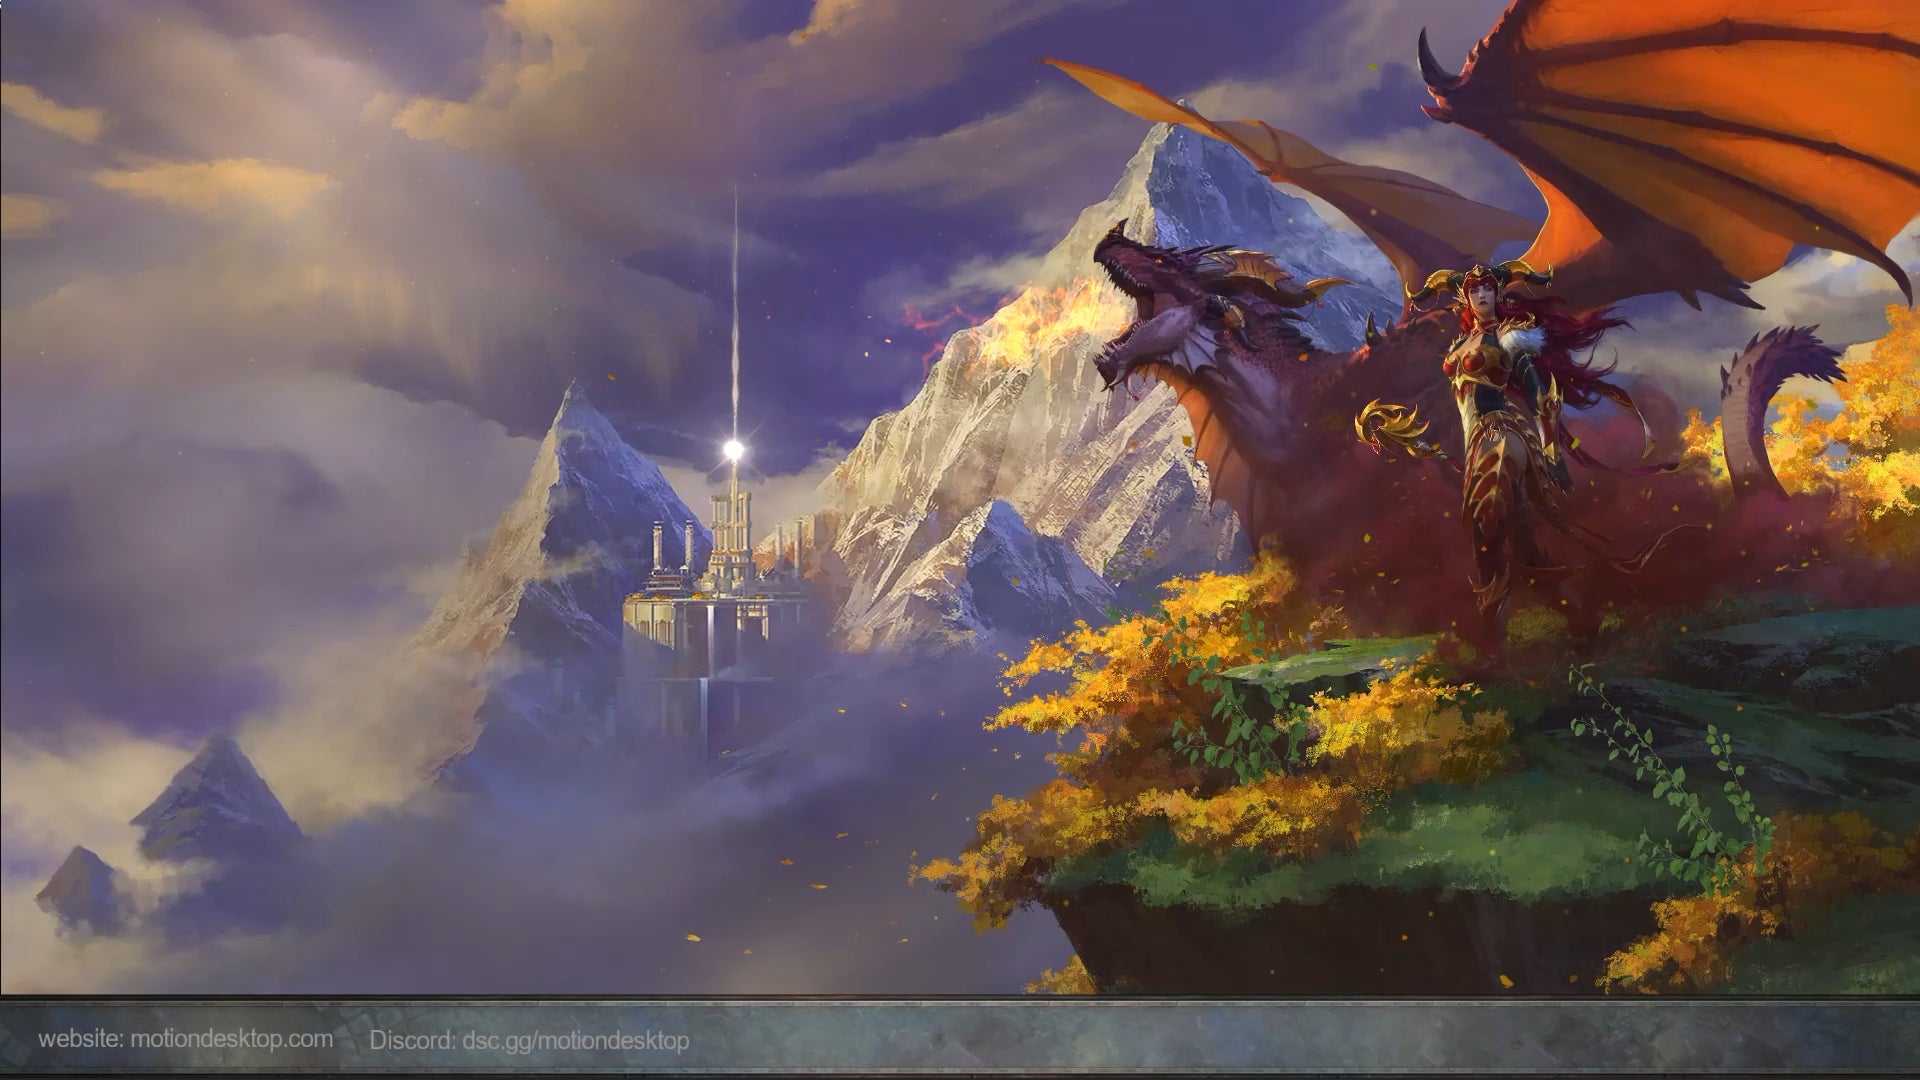 I used dragonflight websites background to make another WoW animated wallpaper. Don't judge too much, i'm still learning (links in comments)